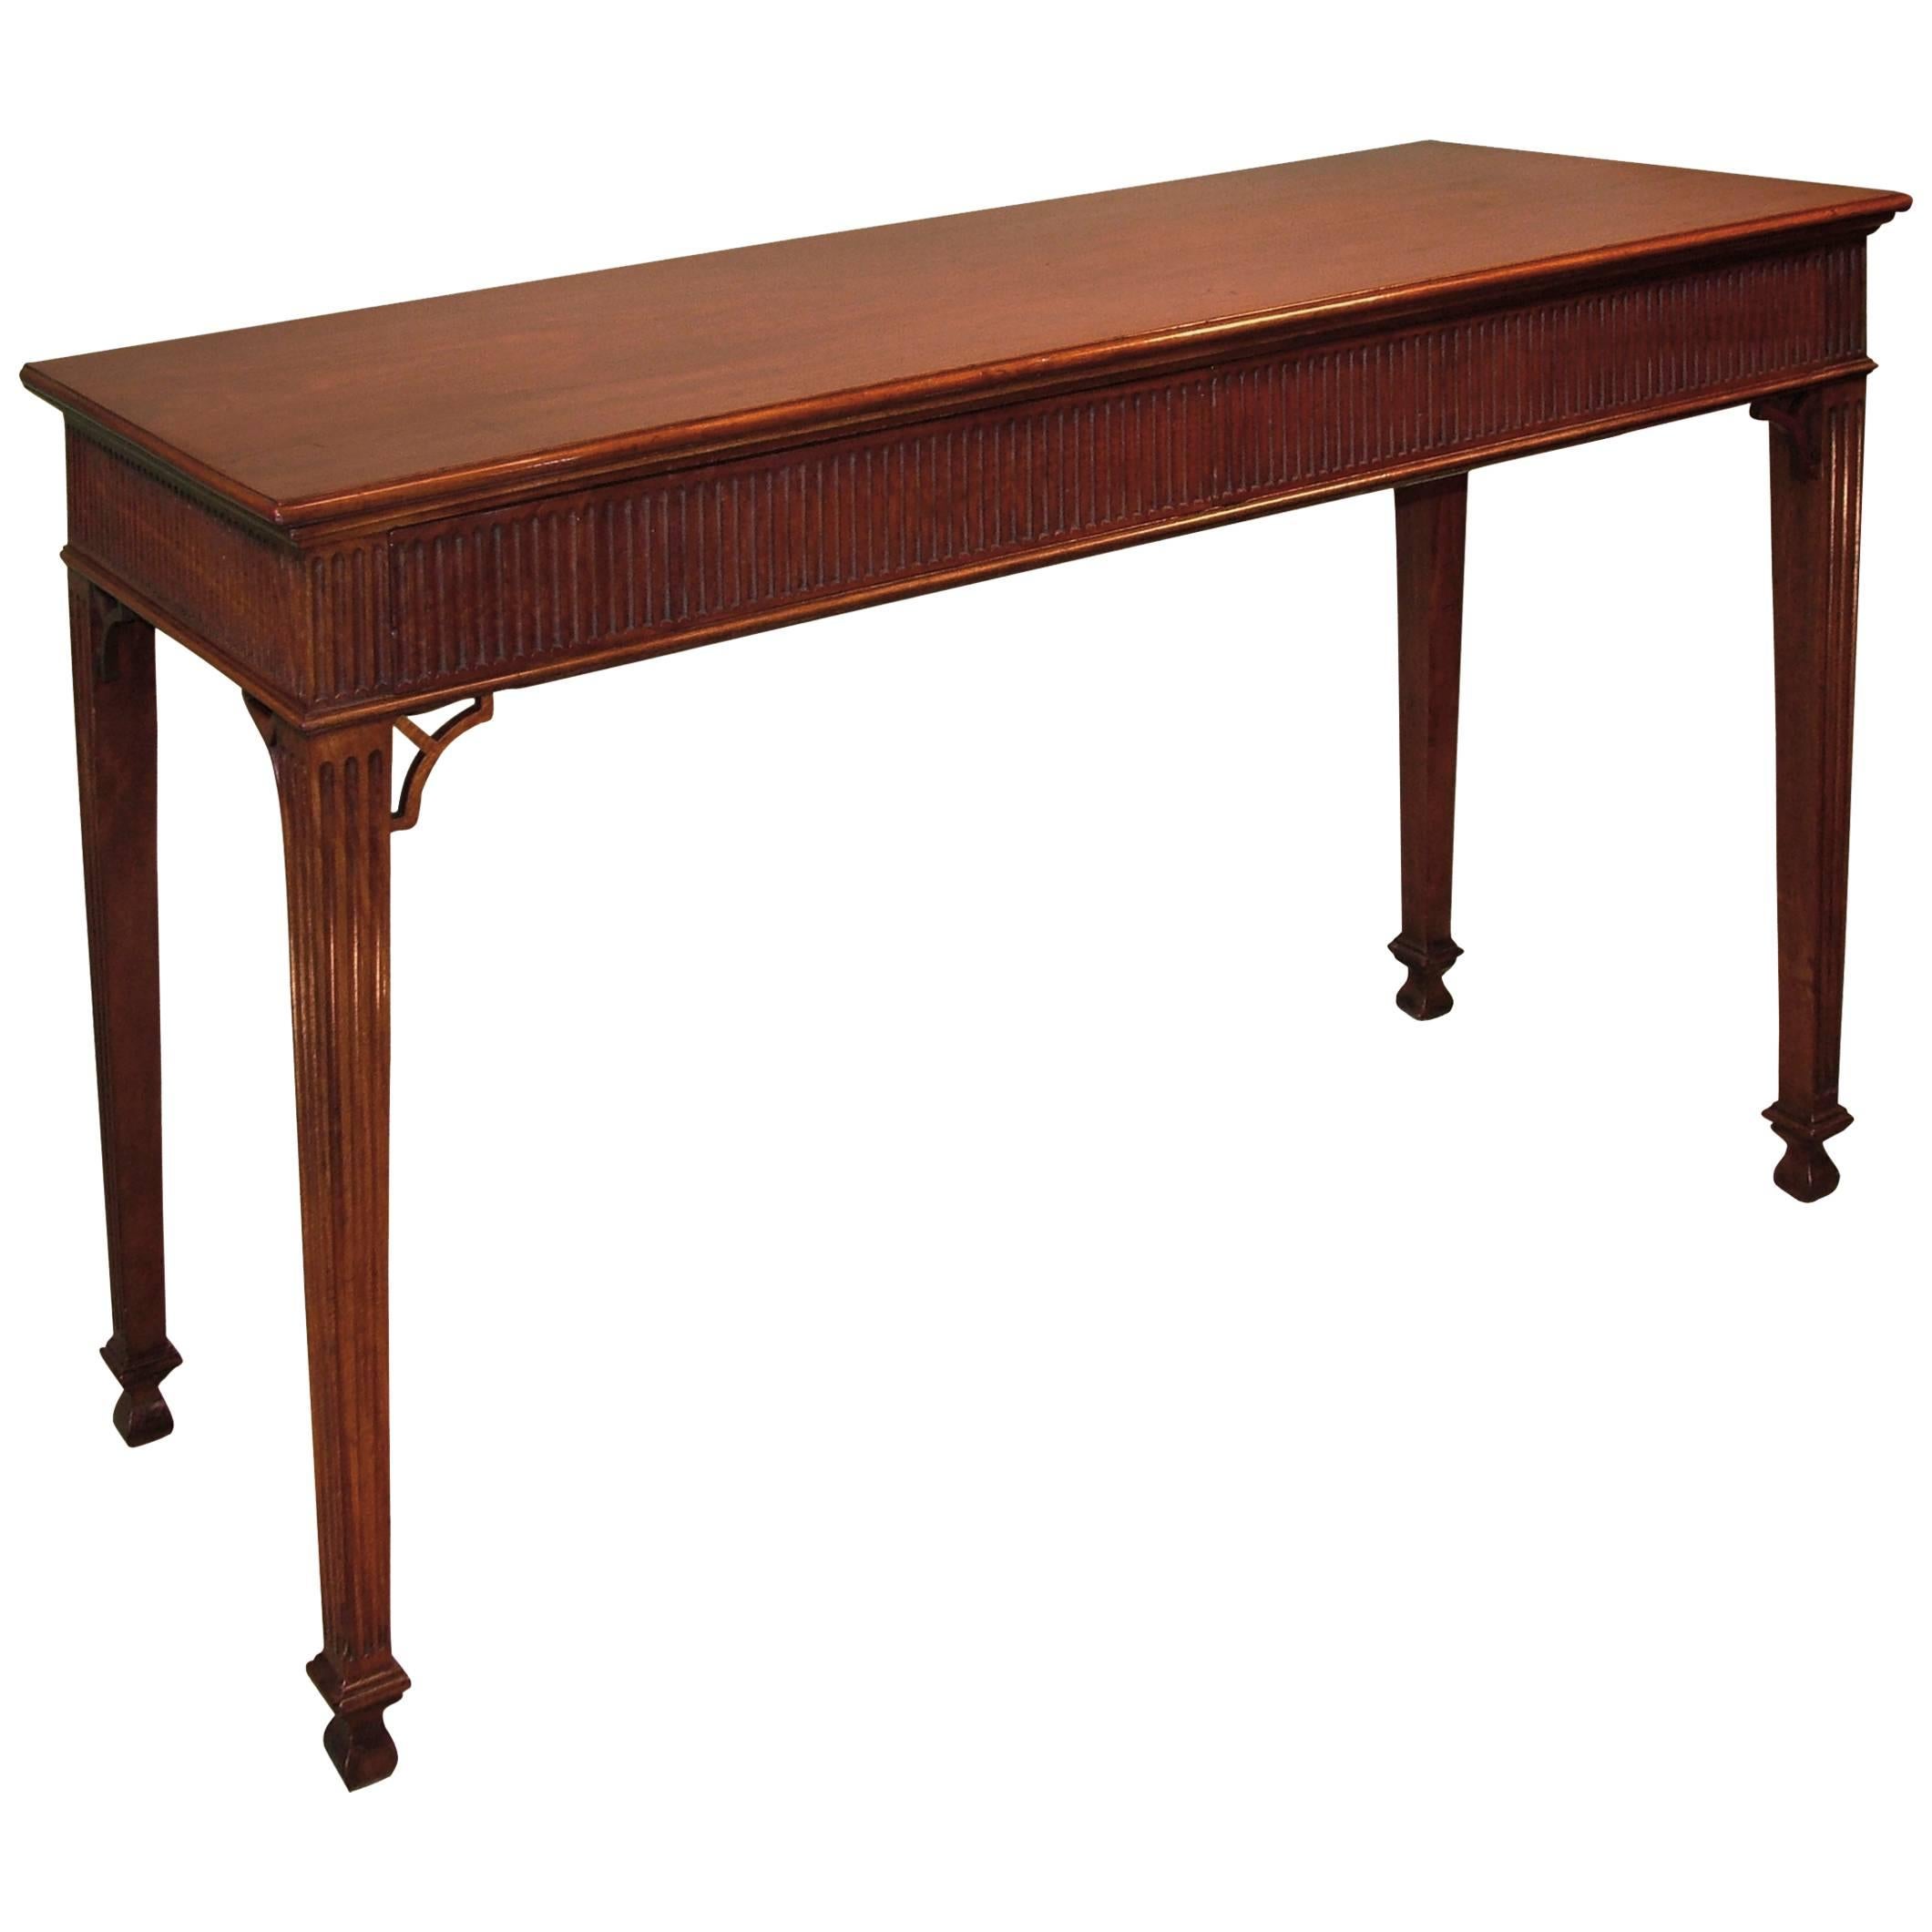 18th Century Chippendale Period Mahogany Serving Table